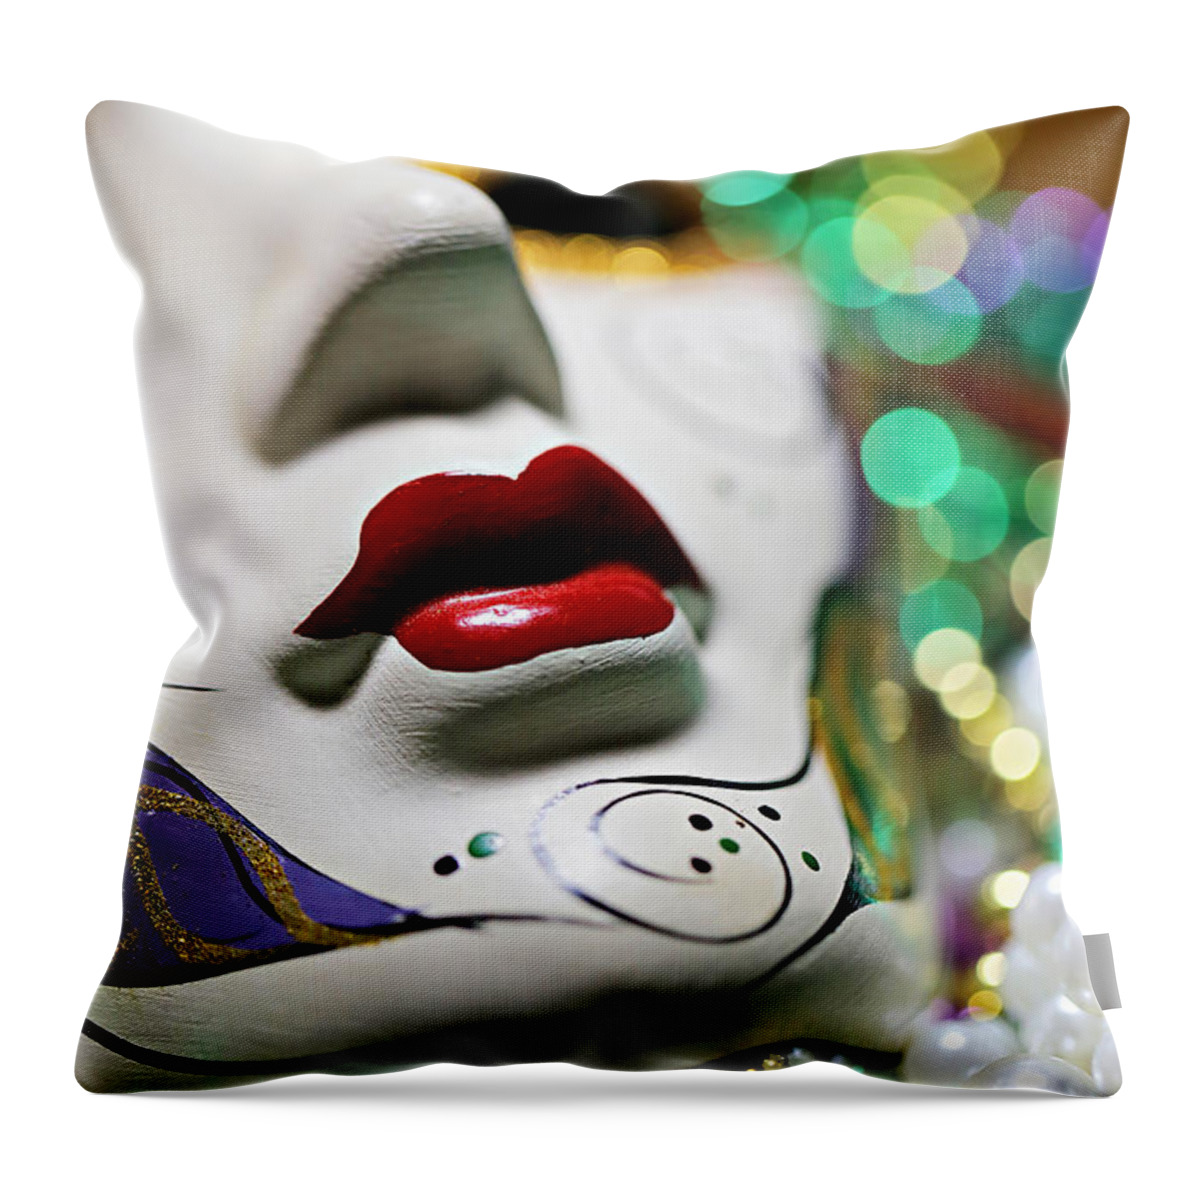 Beads Throw Pillow featuring the photograph Mardi Gras II by Trish Mistric